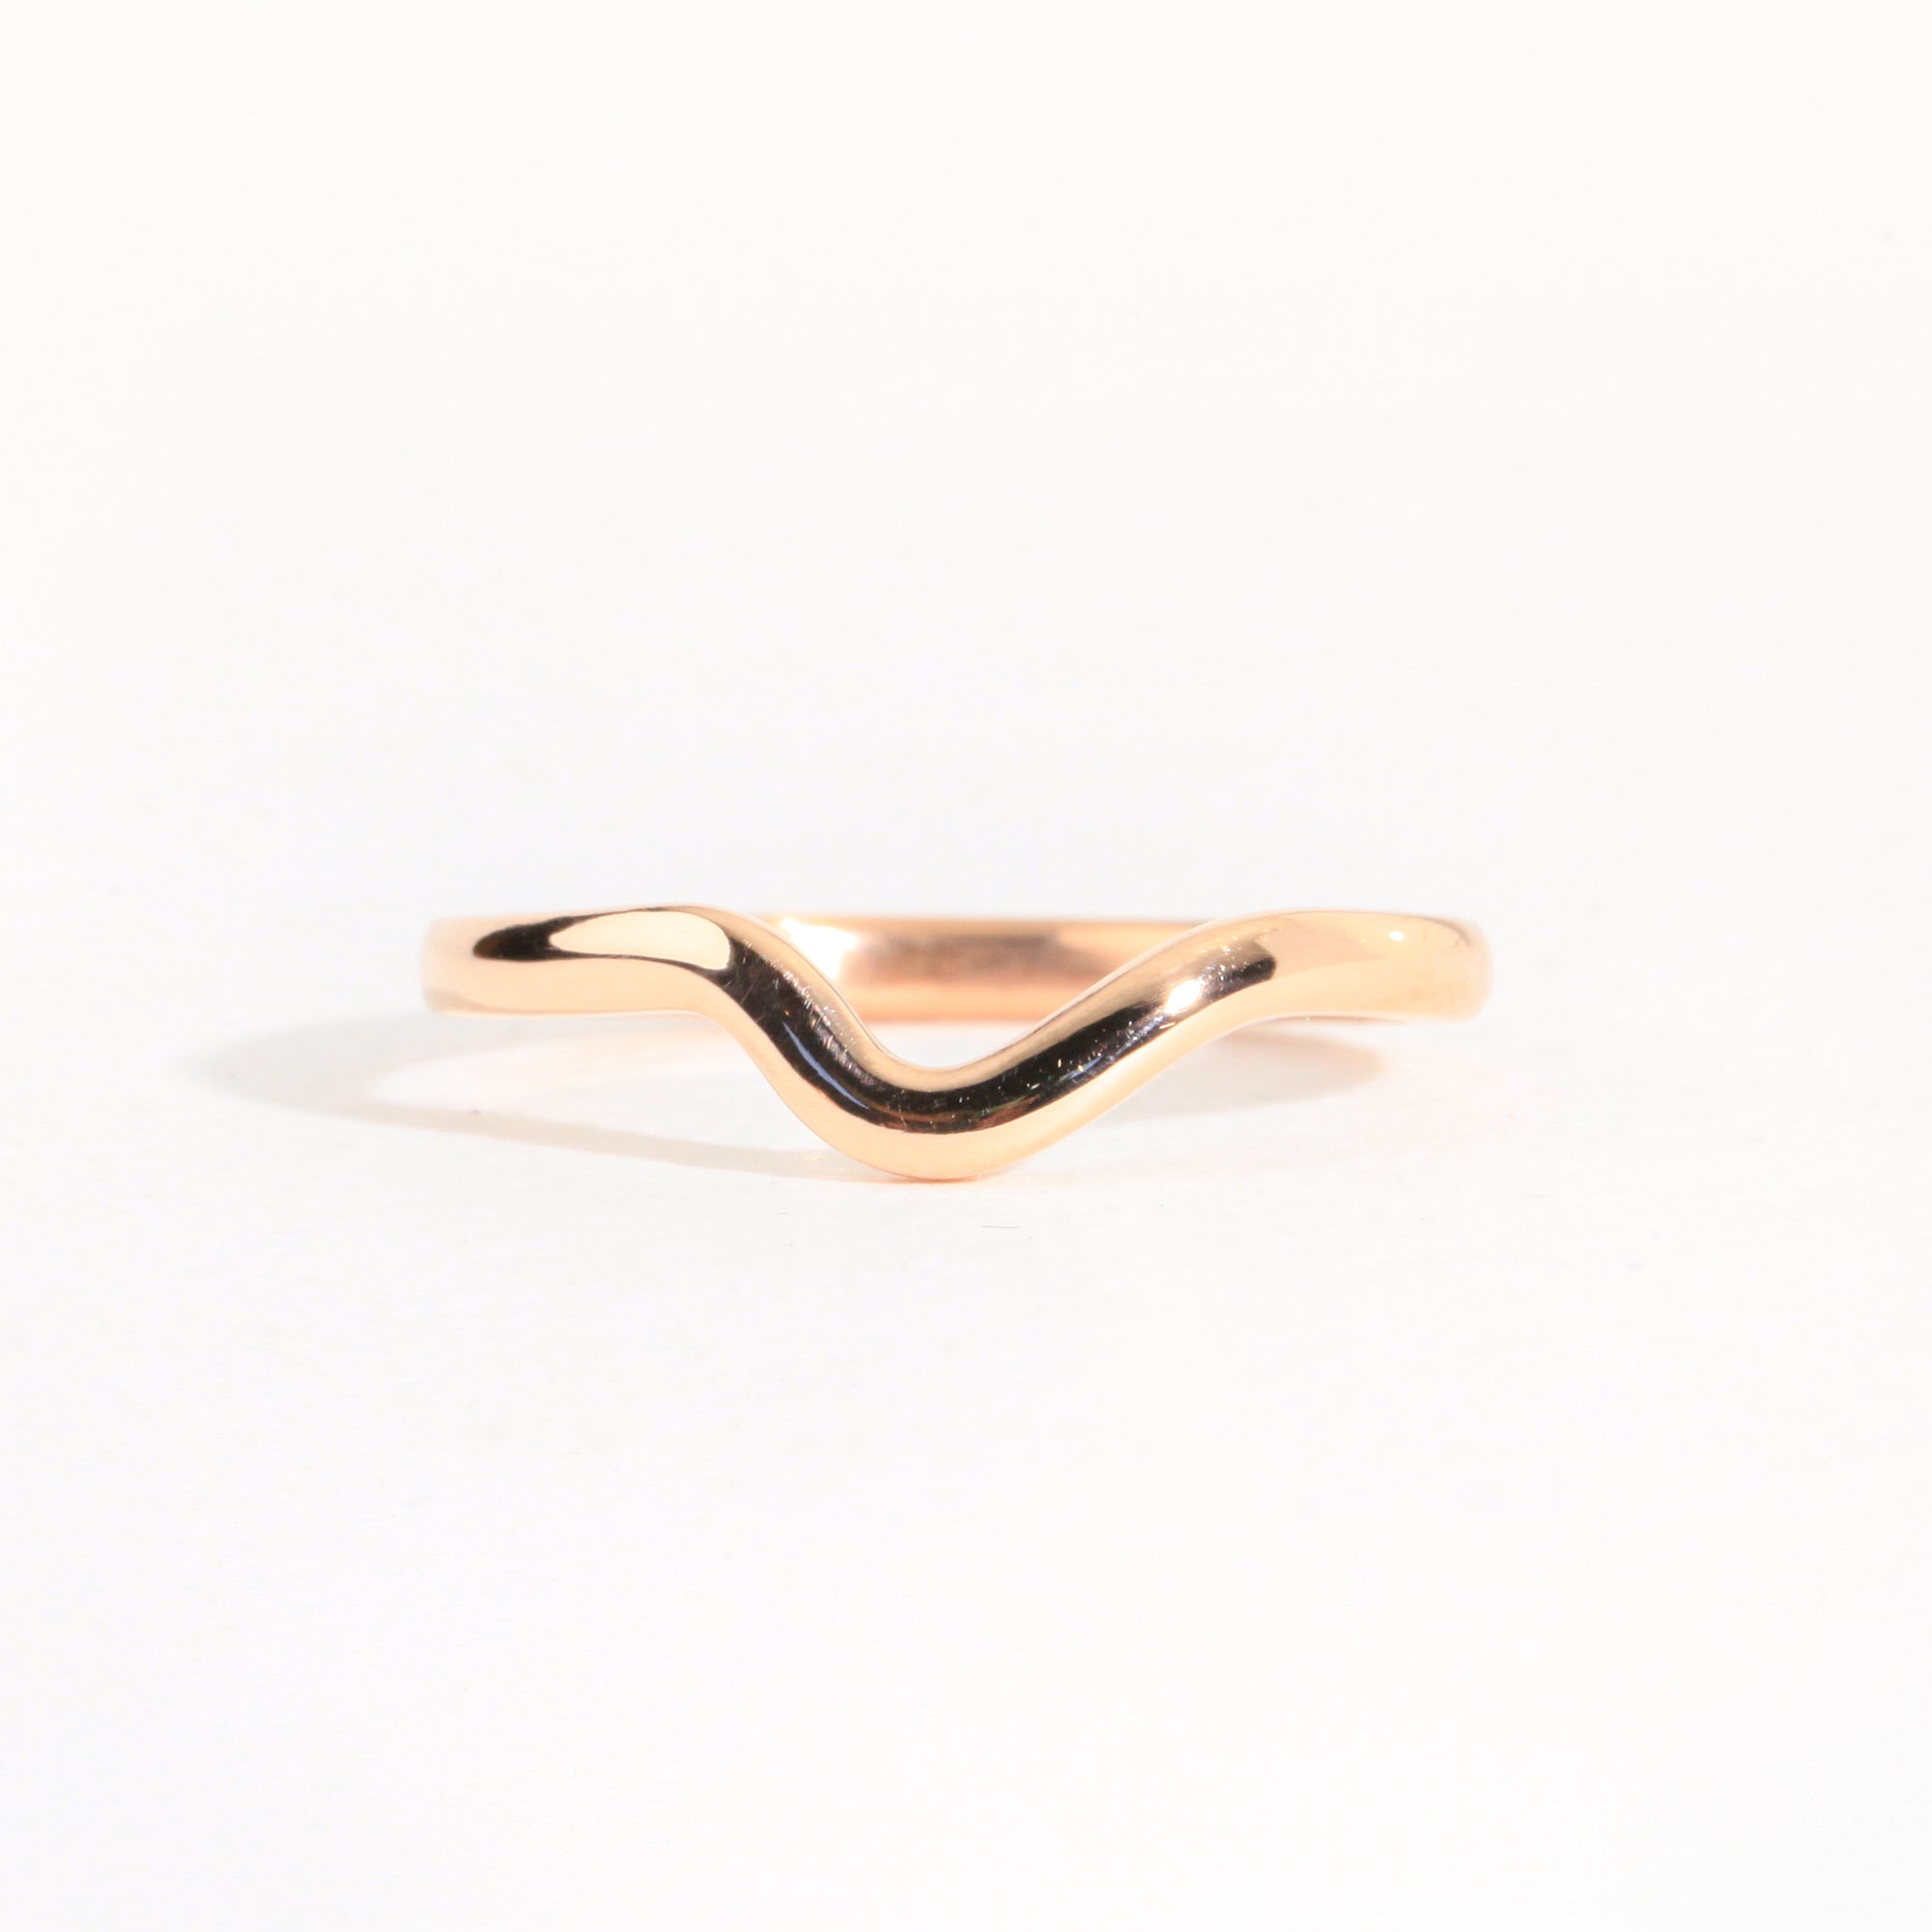 Handmade 18 carat rose gold dimpled band with a polished finish.